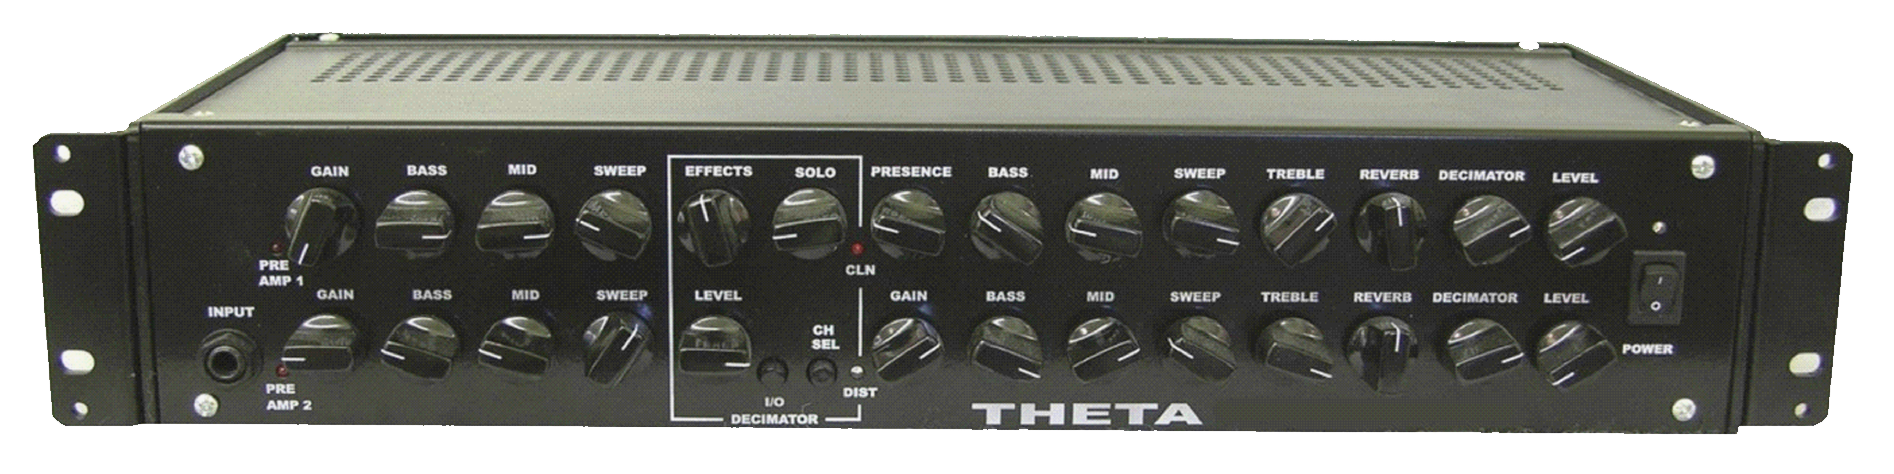 Theta-PreAmp-ISP-Technologies.png